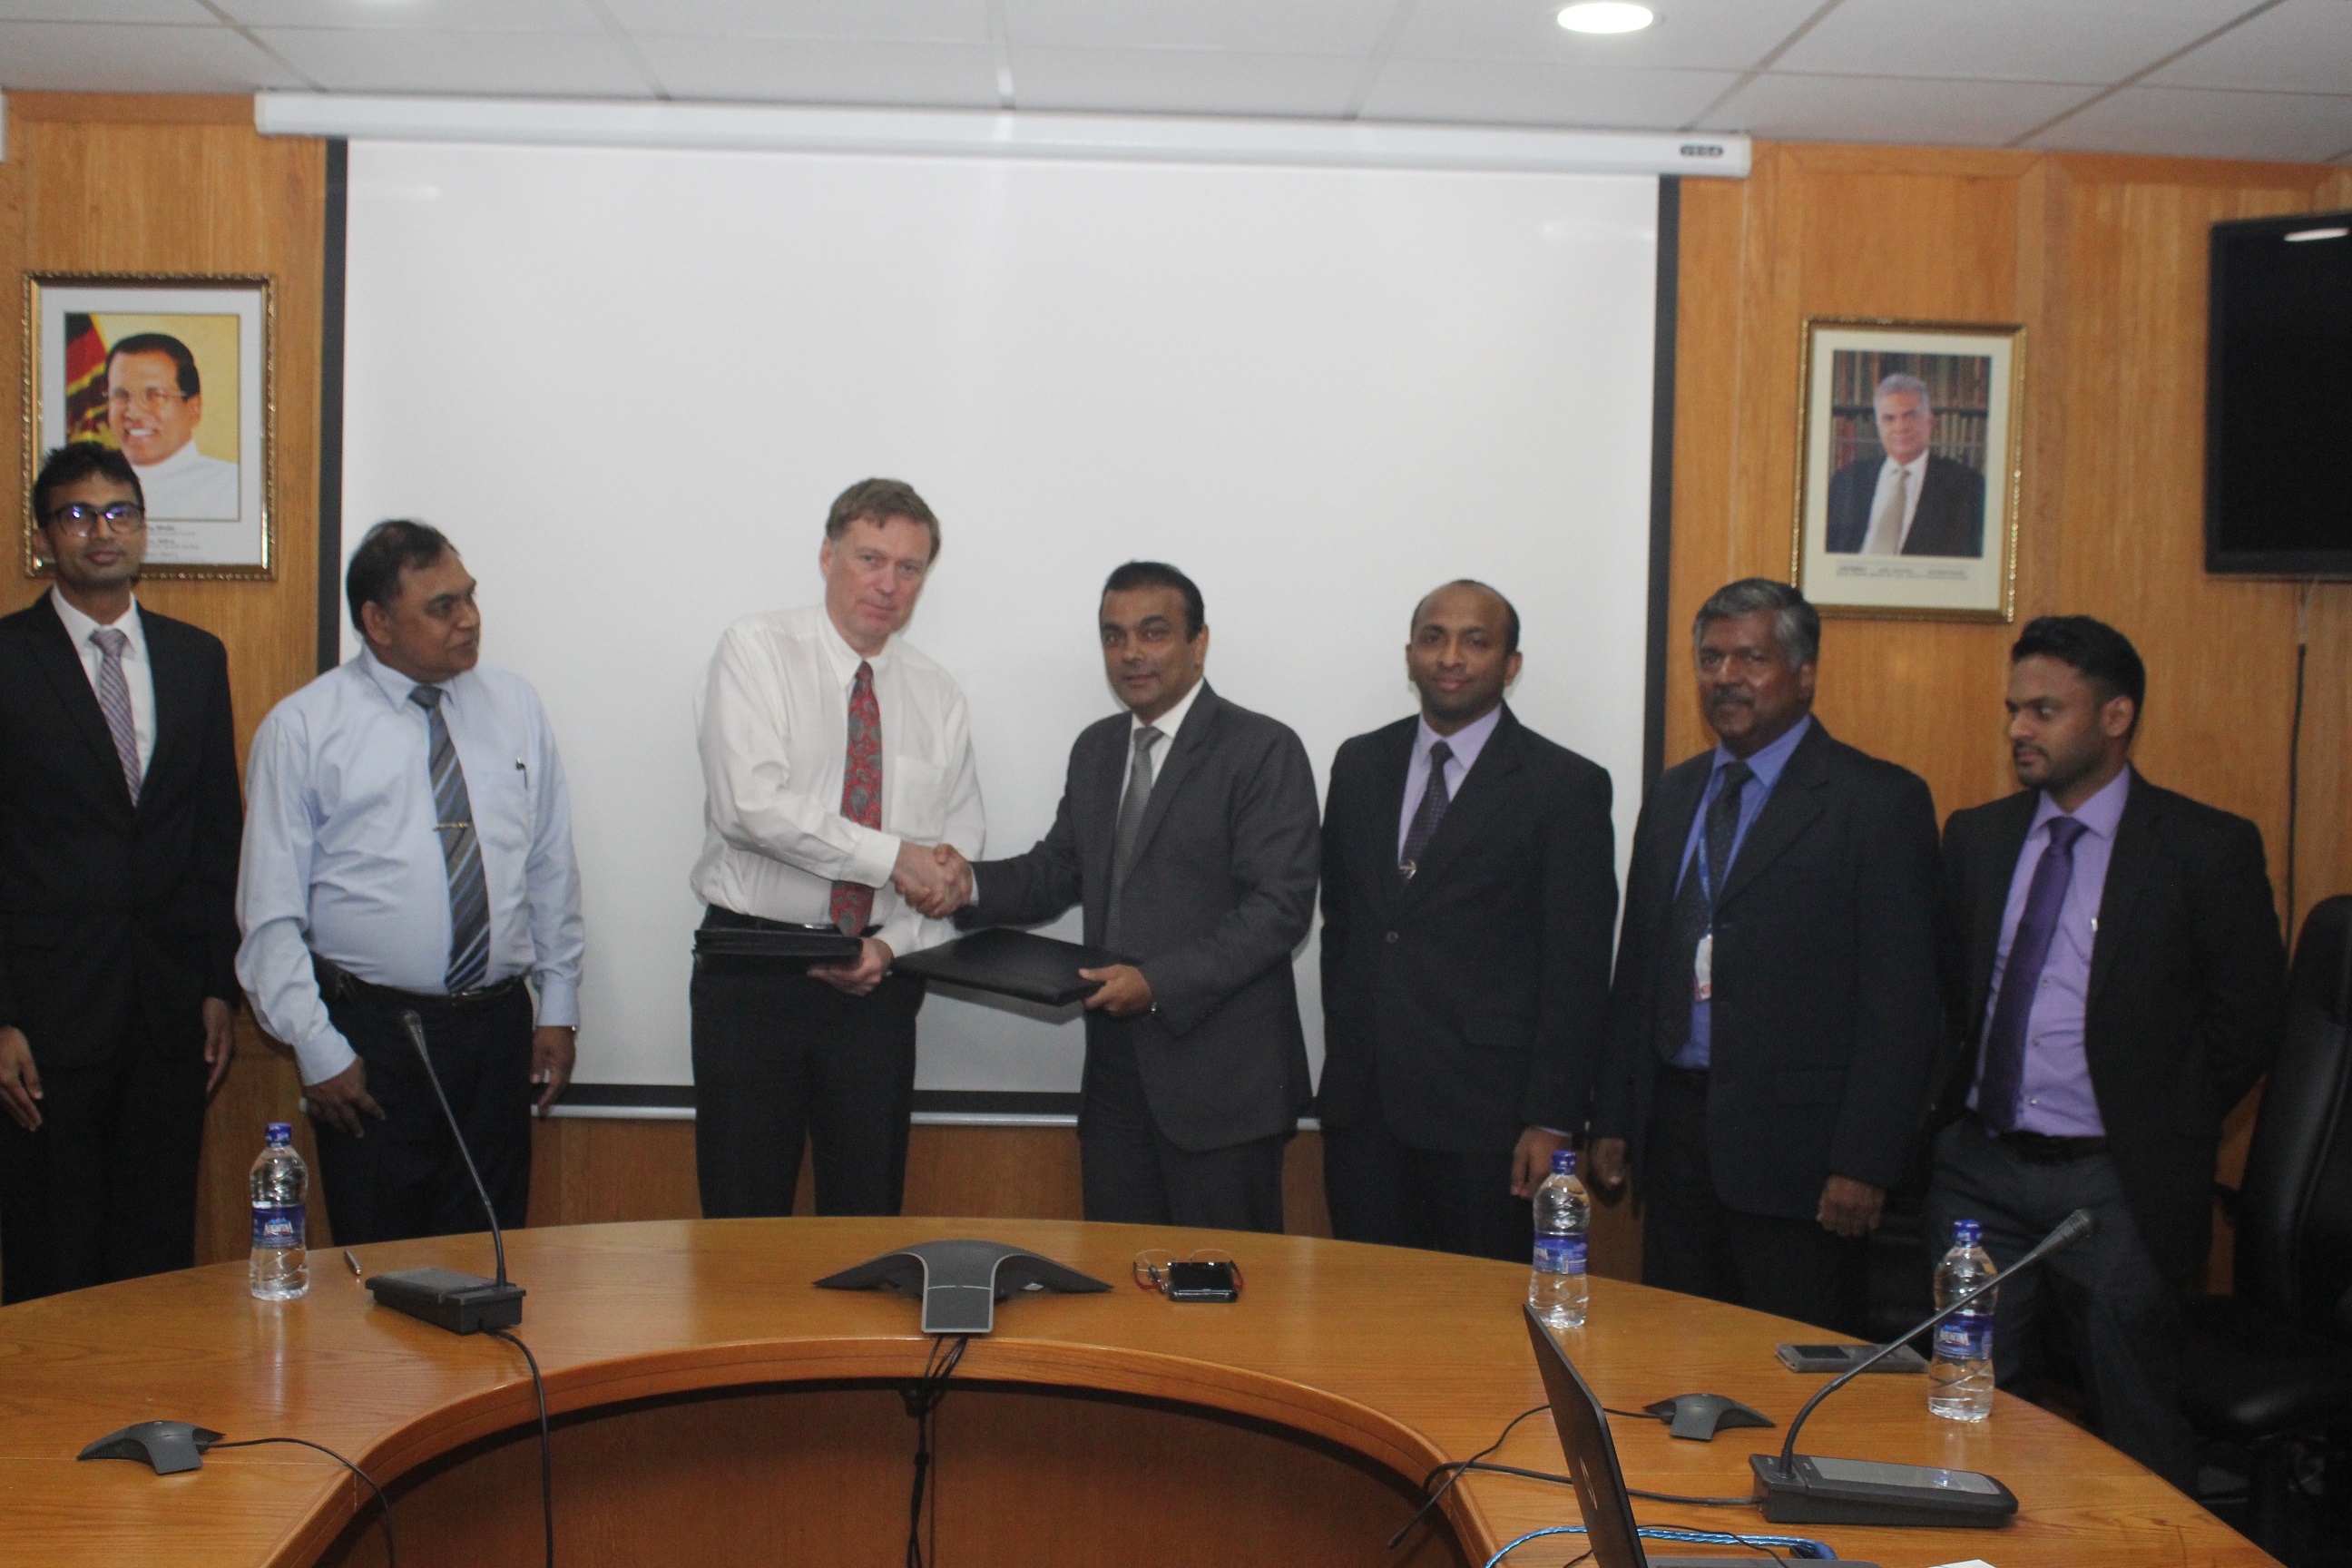 Signing of the MOU: Prof. Peter Barrington, Head of the Department of Aerospace and Aircraft Engineering of Kingston University and Mr. Primal De Silva, General Manager, SriLankan Aviation College, together with Prof. H.Y. Ranjit Perera, Dean of IESL College of Engineering Sri Lanka, and Management and Engineering Instructors of SriLankan Aviation College.